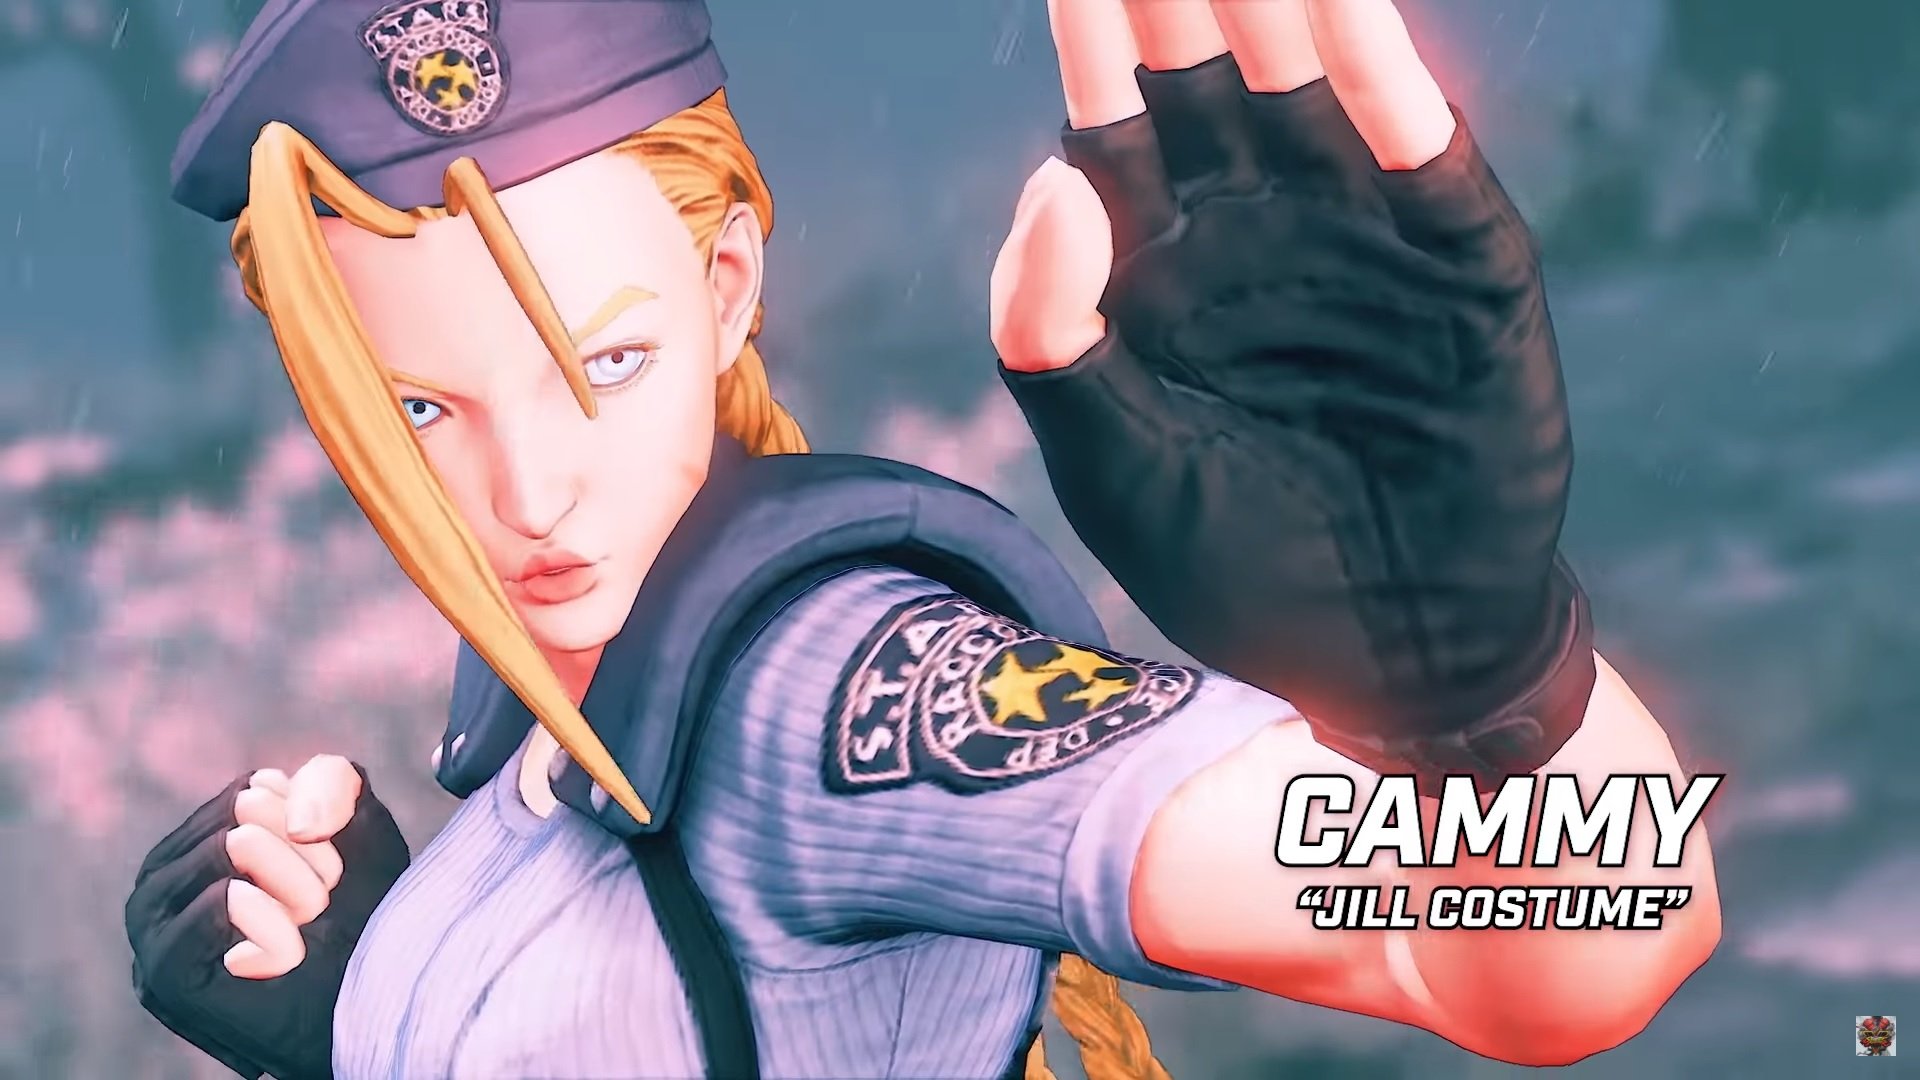 Street Fighter 5 could receive some new Resident Evil costumes for